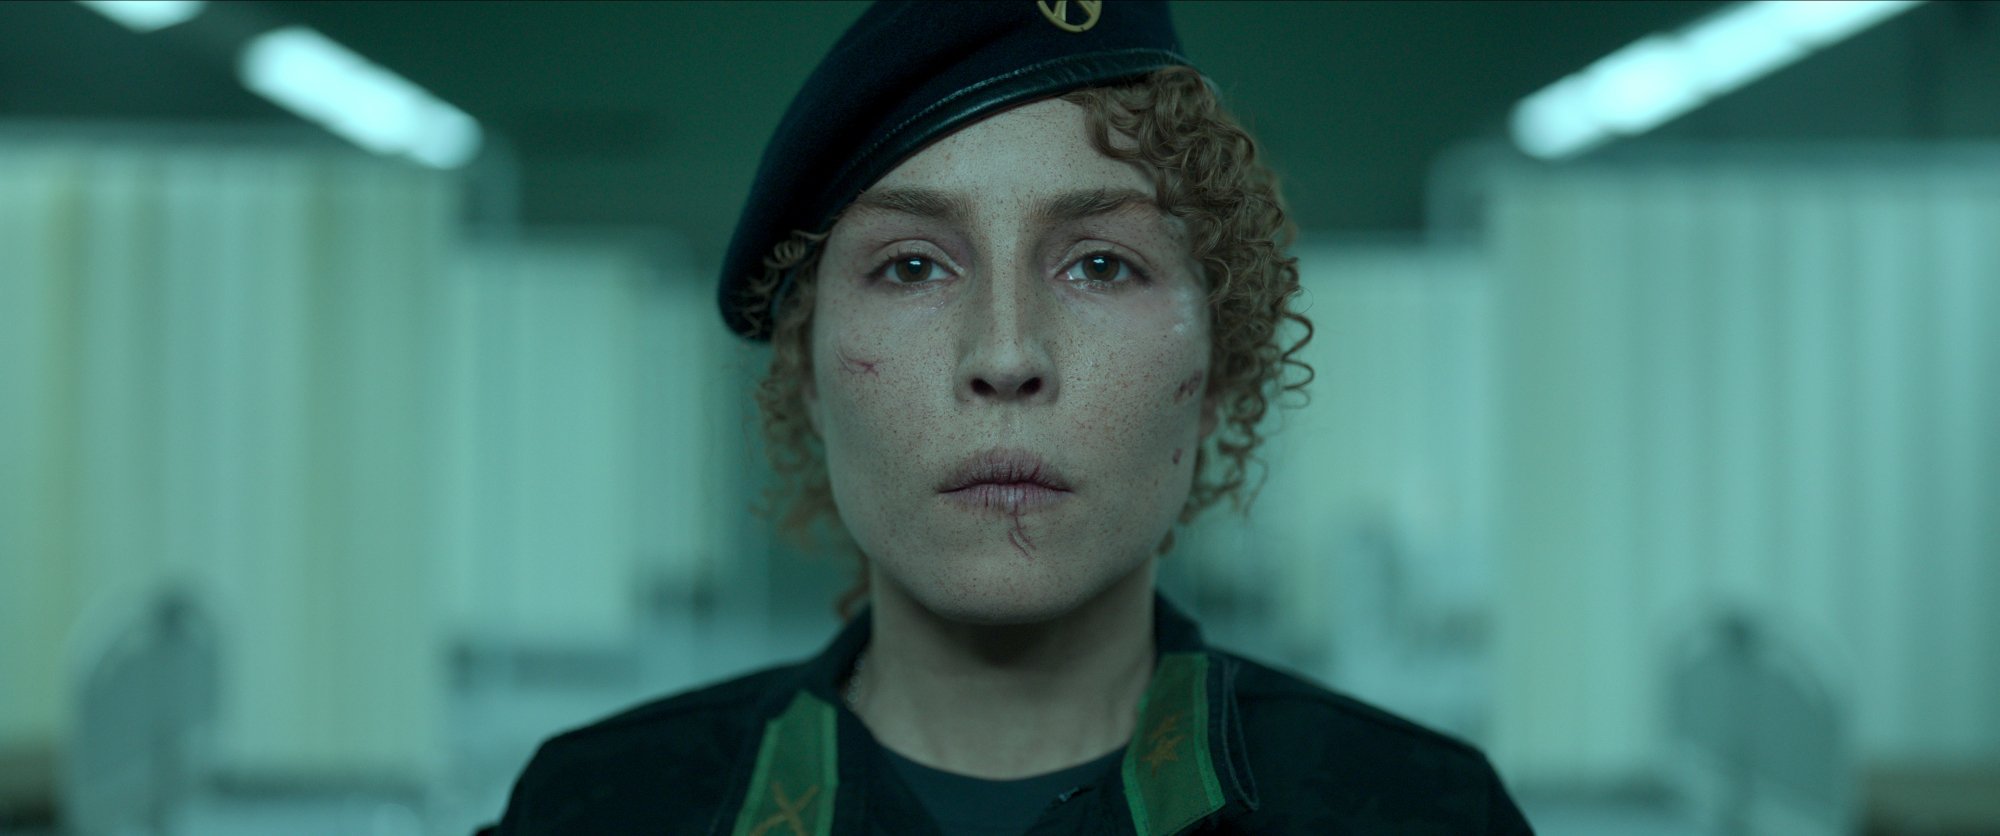 ‘Black Crab’ Movie Review: Noomi Rapace Delivers In Solid Netflix Thriller